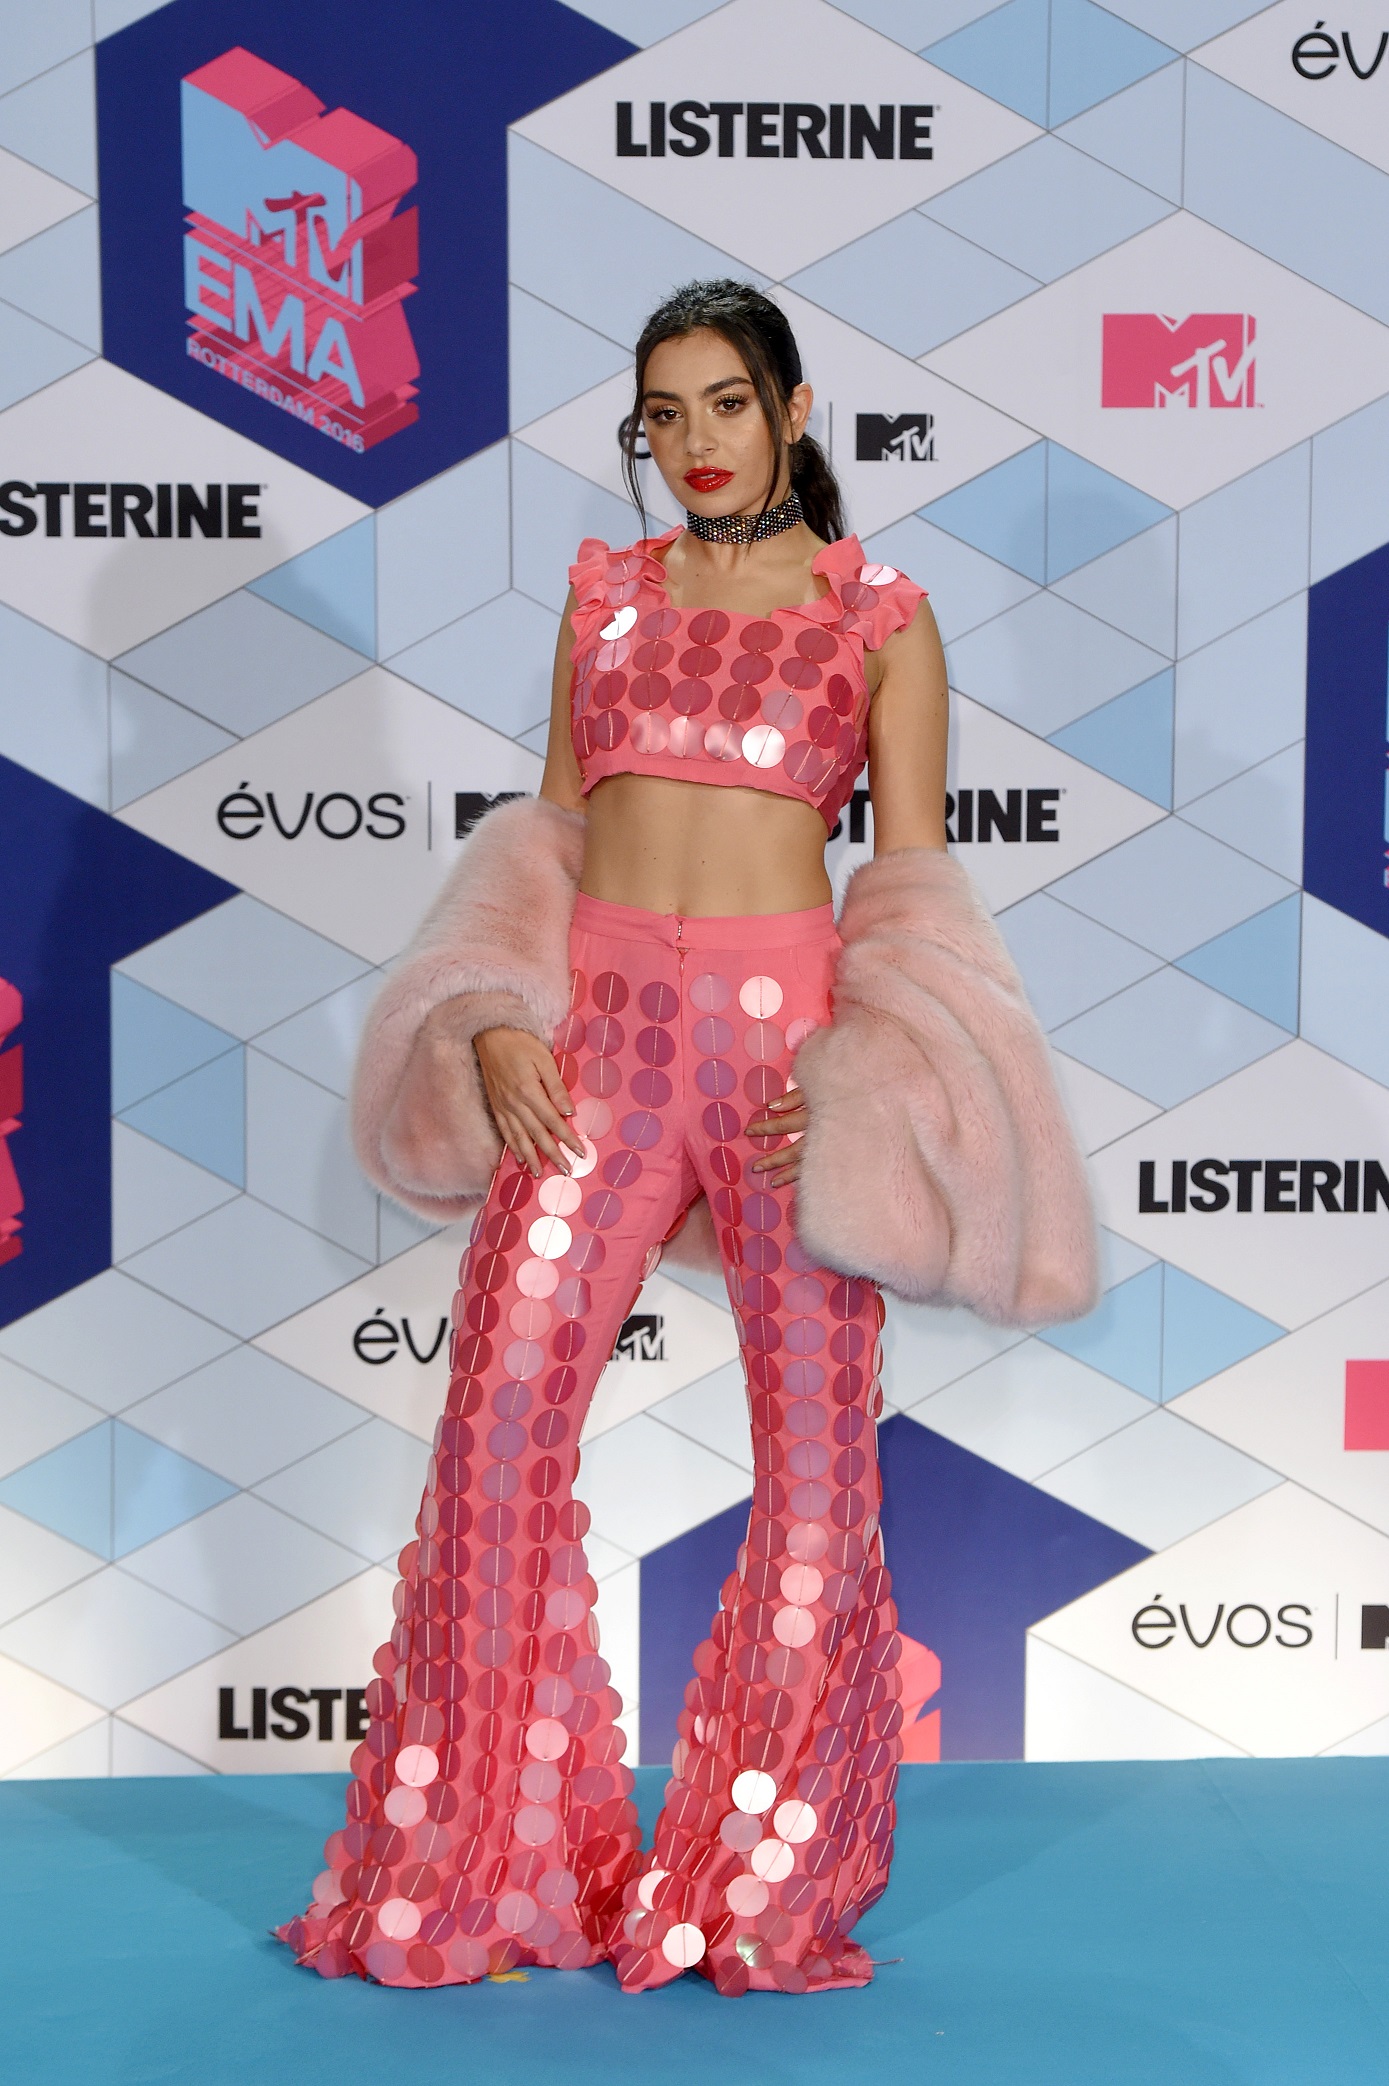 ROTTERDAM, NETHERLANDS - NOVEMBER 06: Charli XCX poses in the winner's room after presenting the award for Best Electronic to Martin Garrix award during the MTV Europe Music Awards 2016 on November 6, 2016 in Rotterdam, Netherlands. (Photo by Anthony Harvey/Getty Images for MTV)